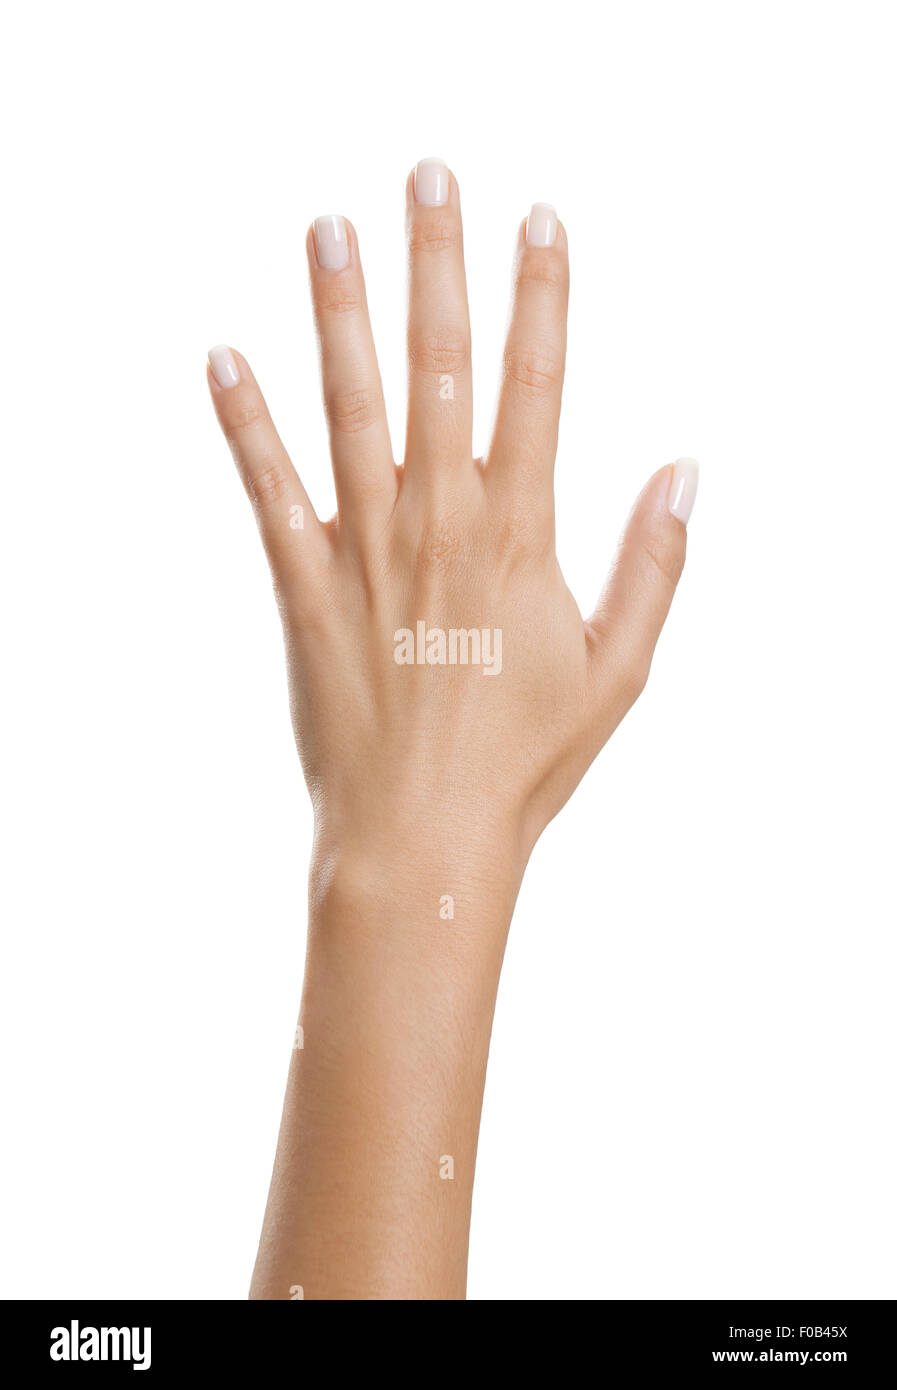 Woman's hand extended with beautiful manicured fingernails, background white, isolated Stock Photo